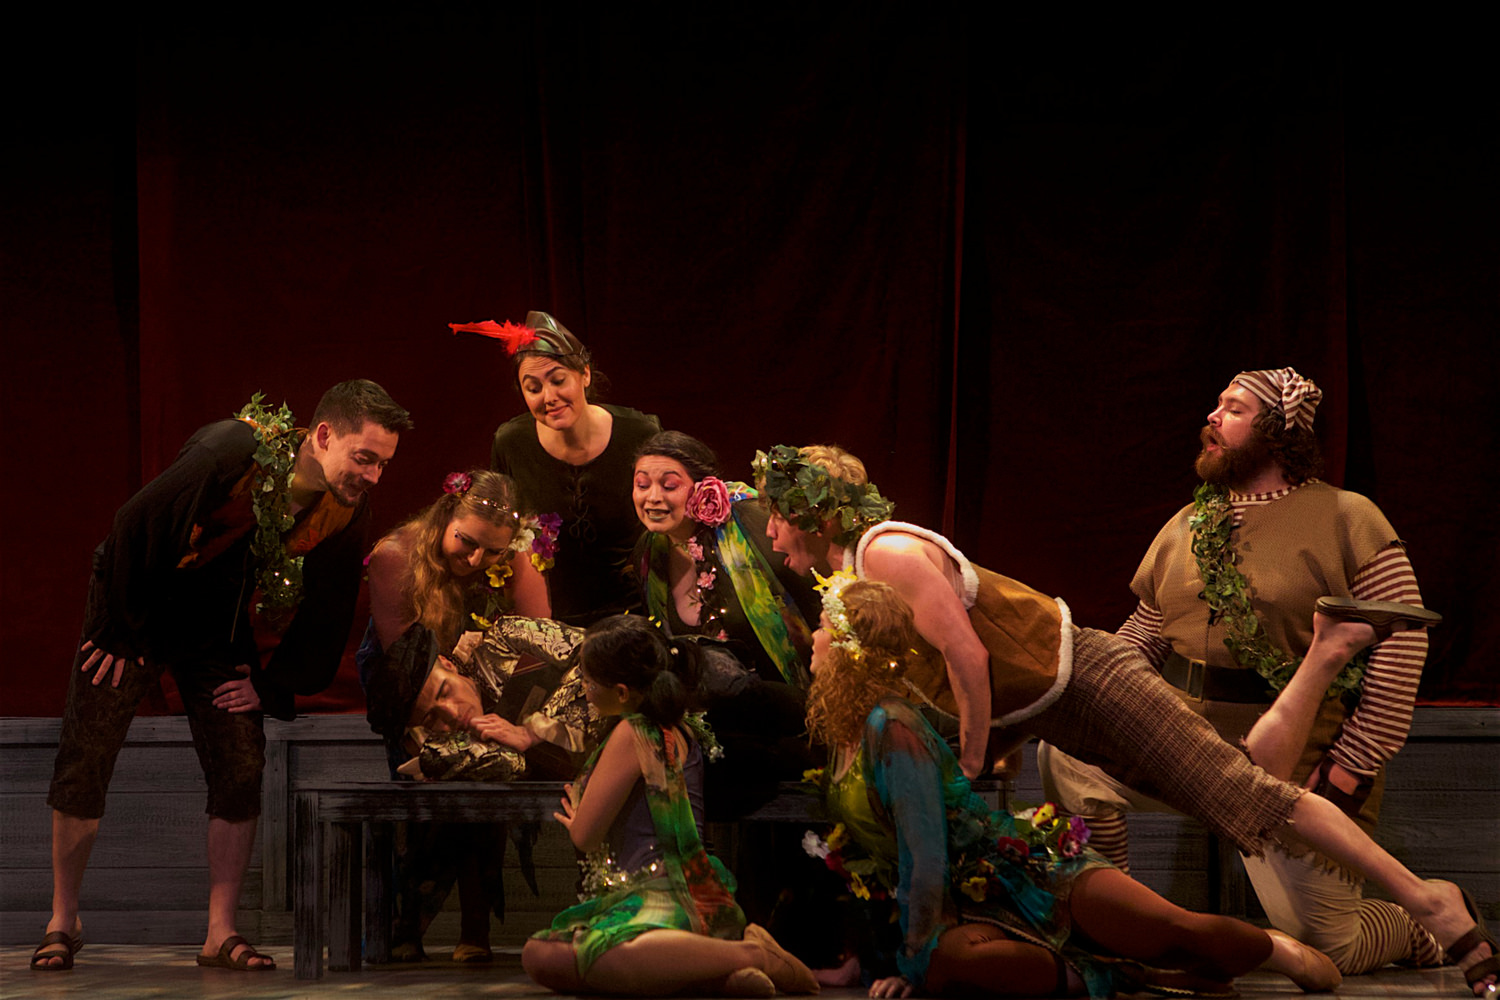 Sammy Huh and the company of Oberon
Photo by Angelisa Gillyard 2